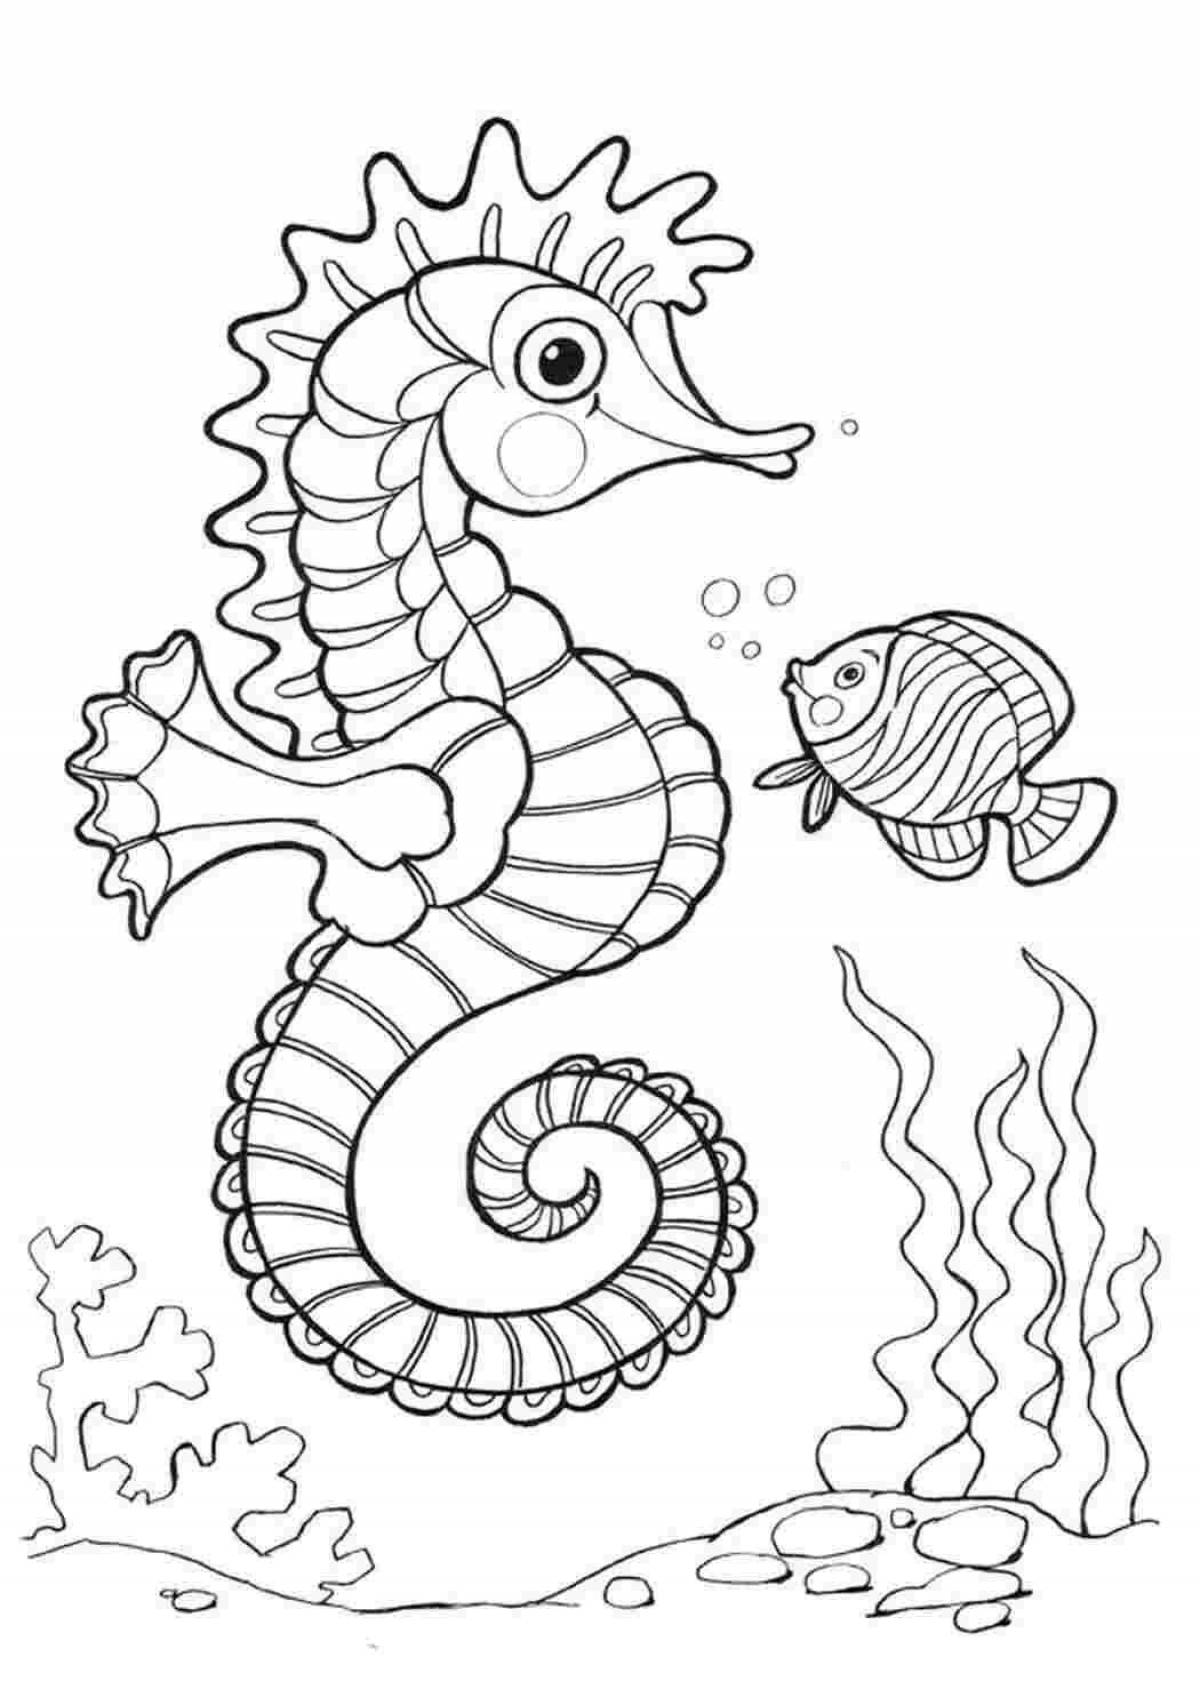 Cute seahorse coloring pages for kids